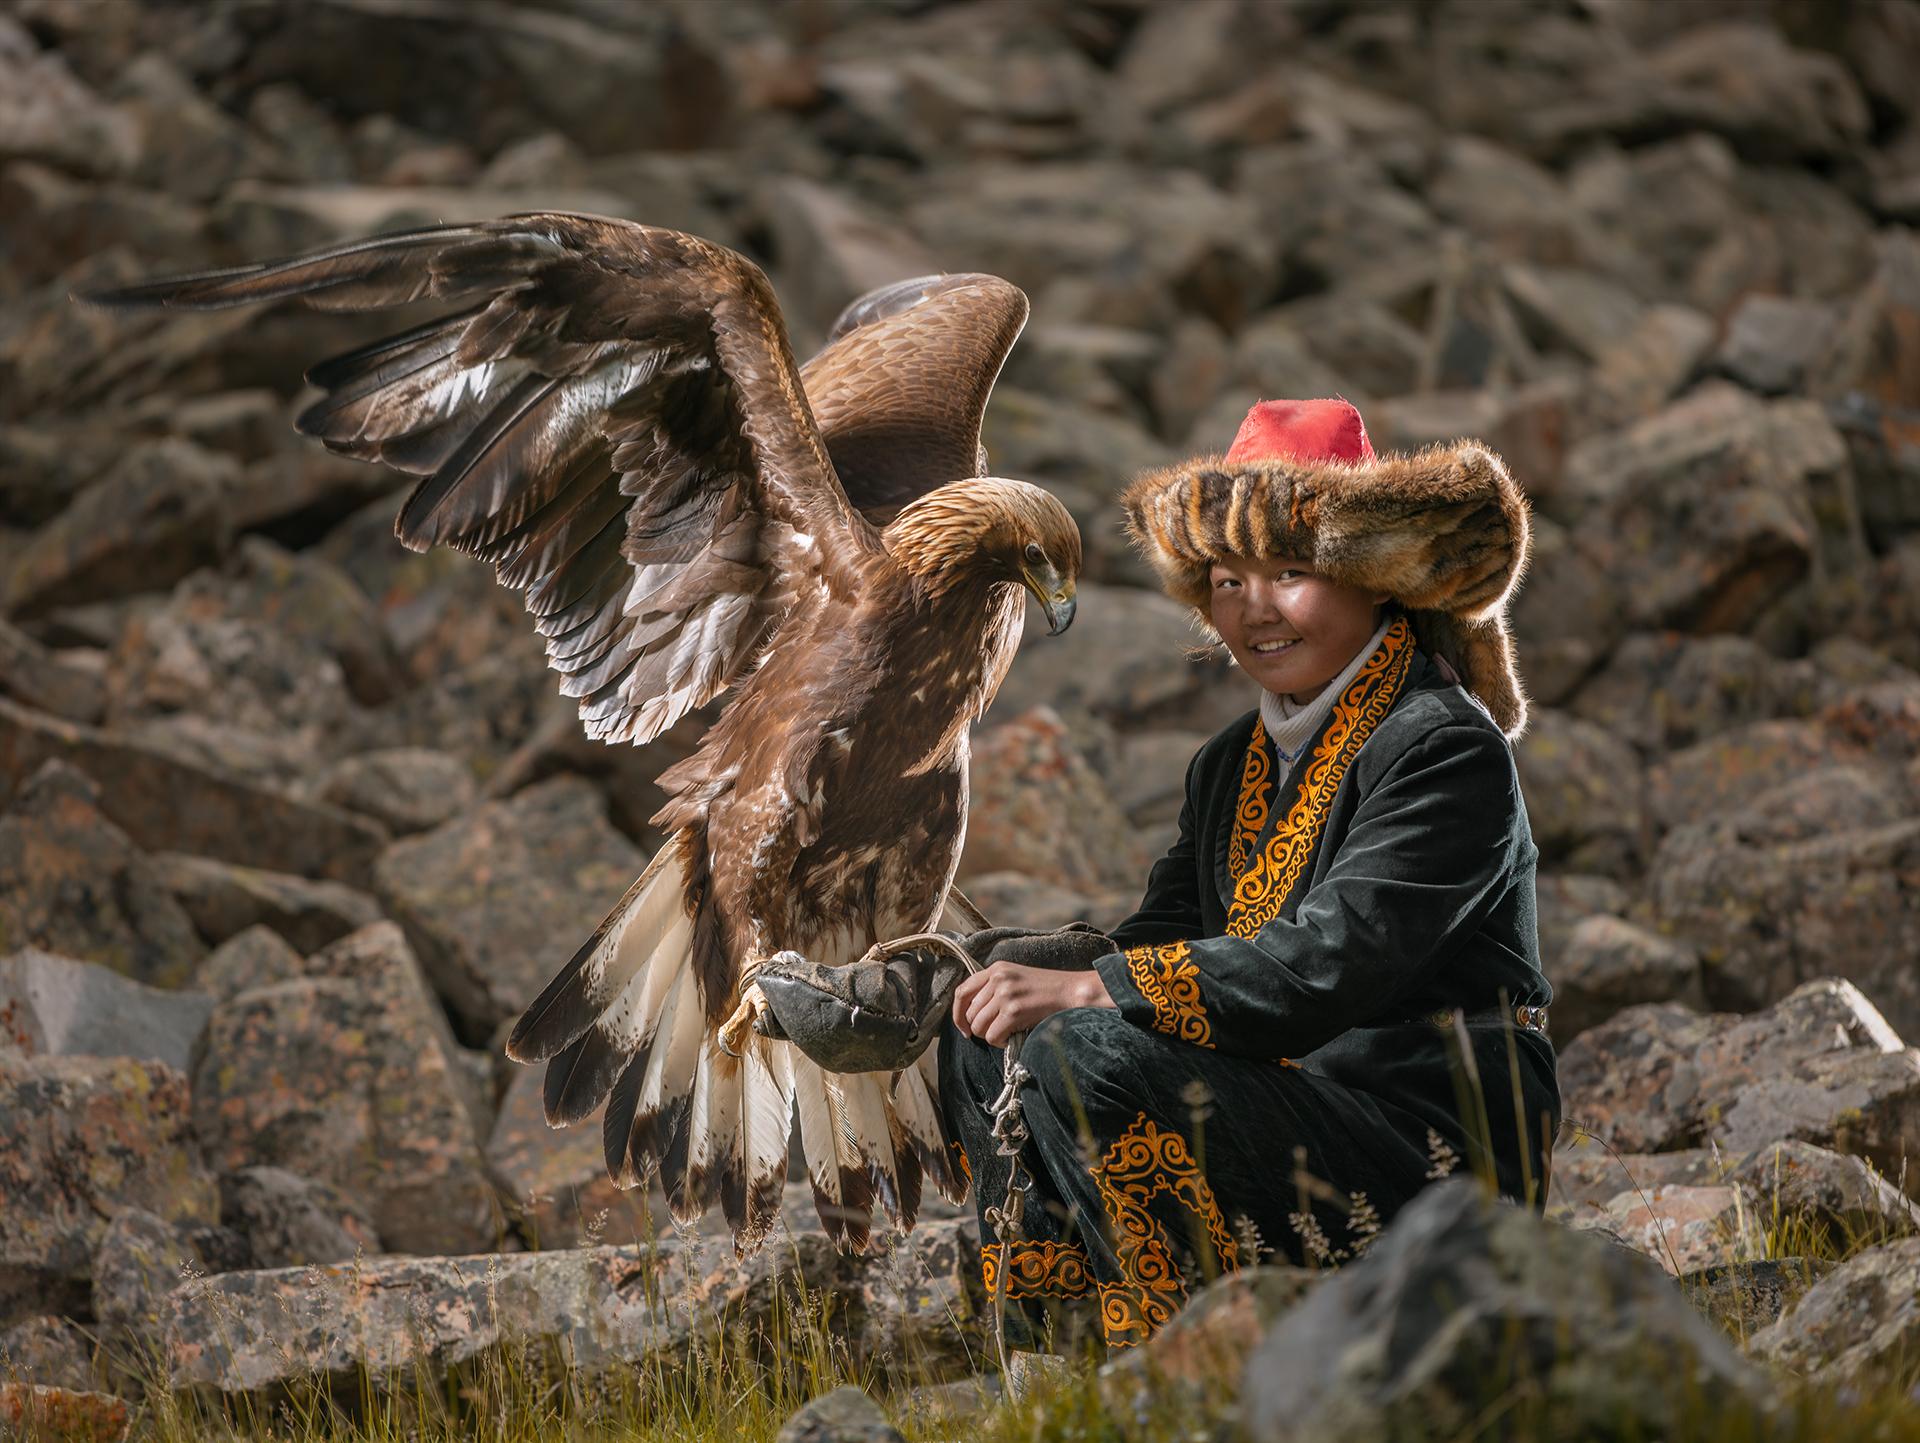 New York Photography Awards Winner - Young Eagle Champion